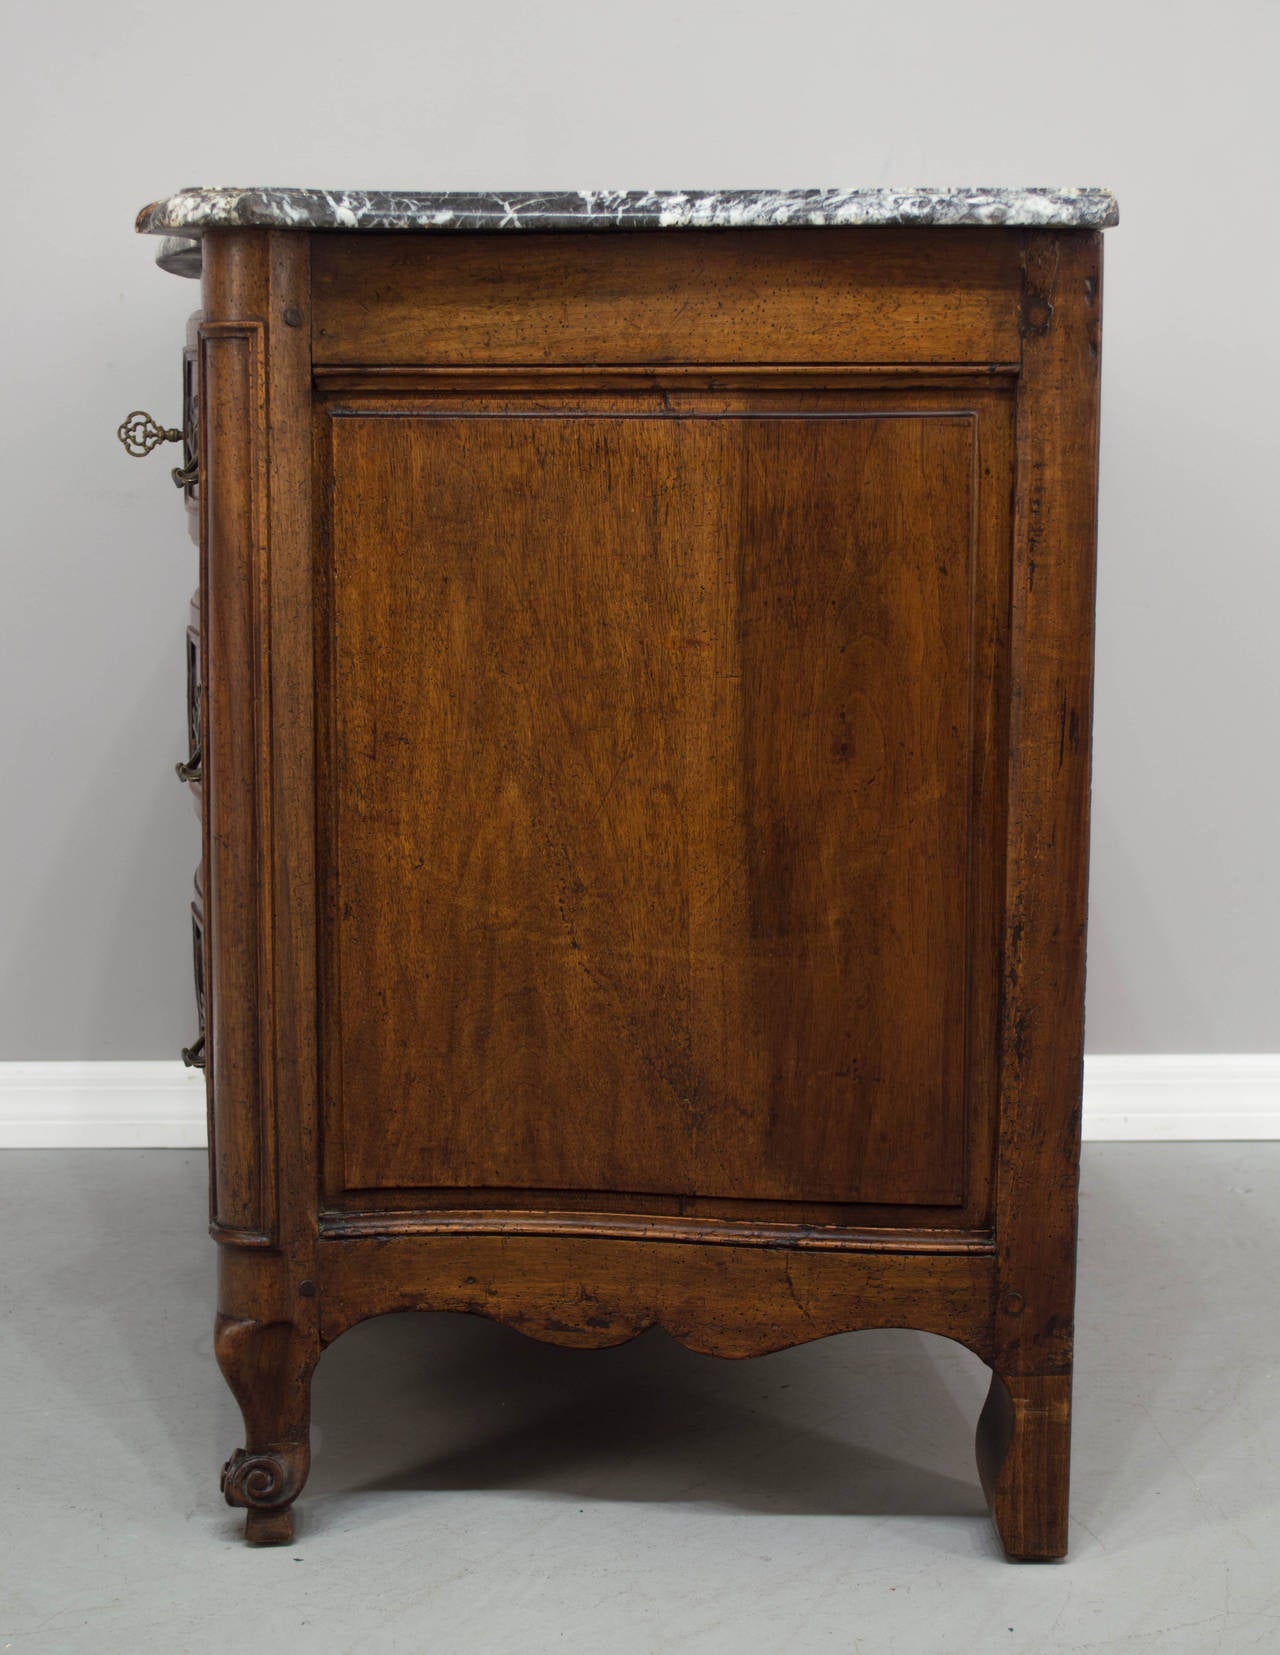 French 18th Century Louis XV Period Commode or Chest of Drawers